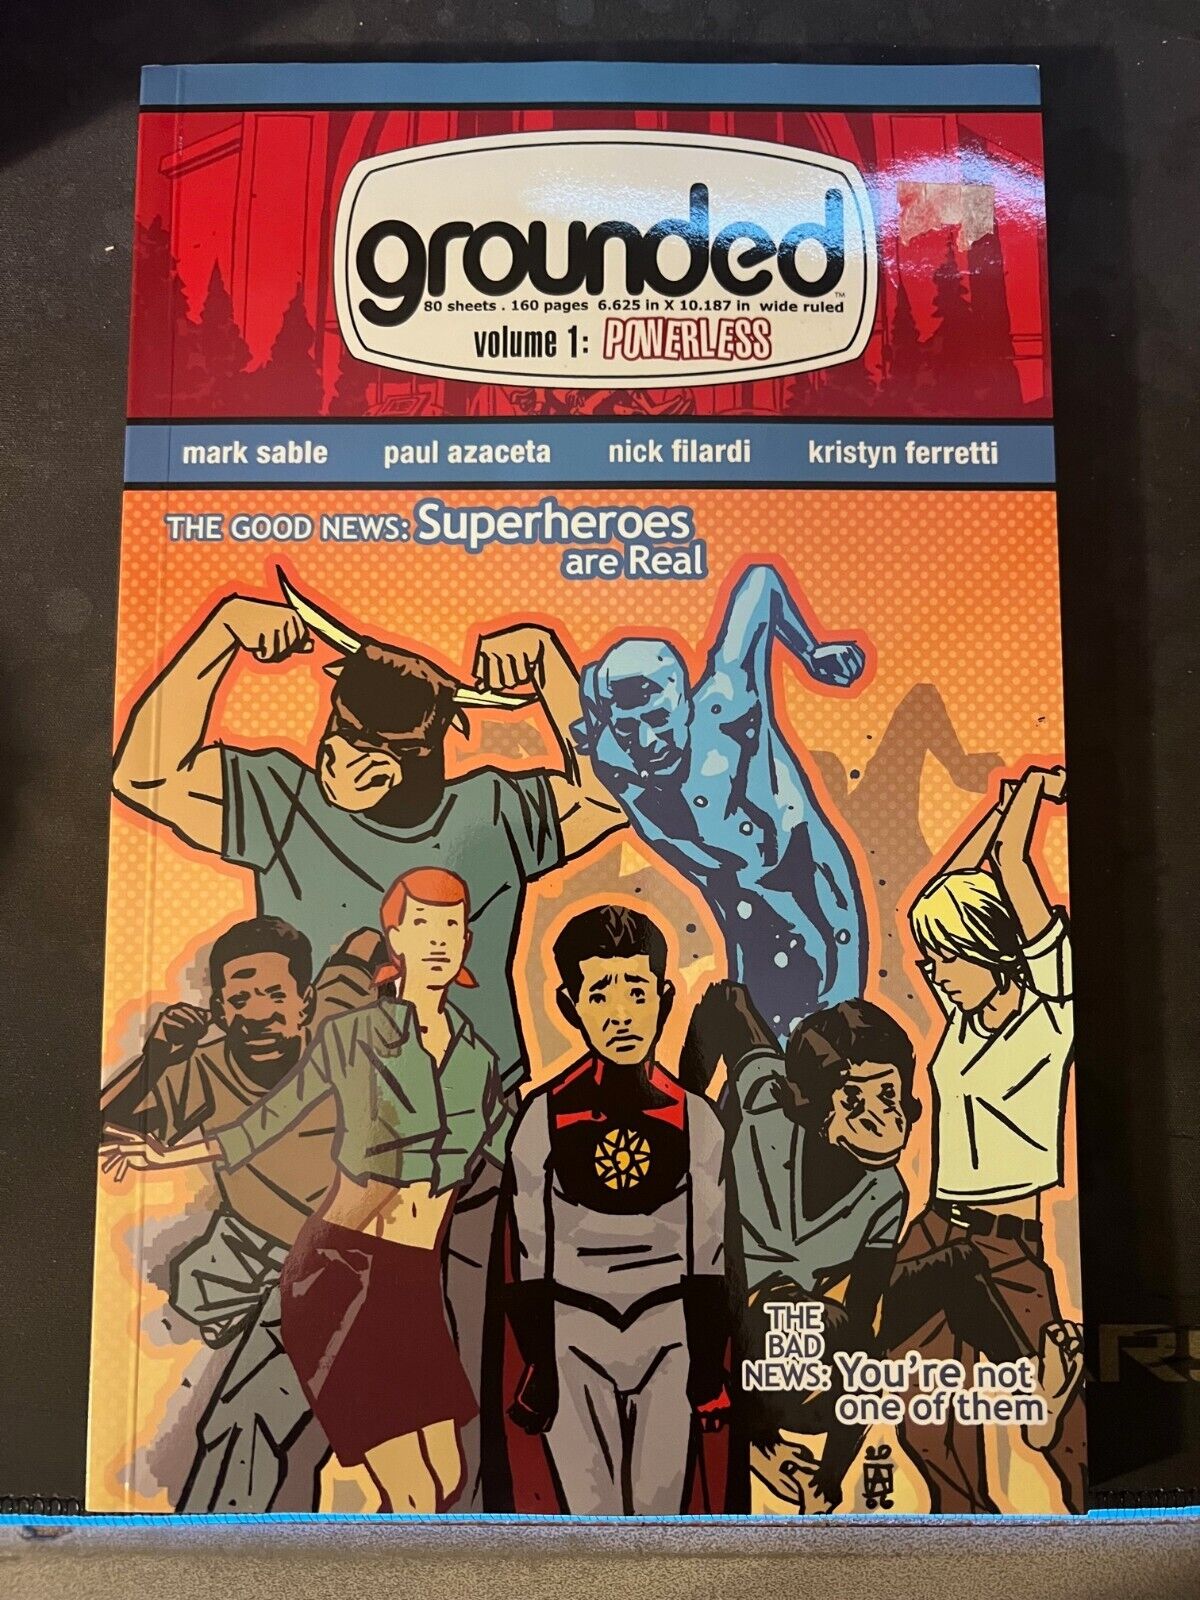 Grounded Volume 1: Powerless by Mark Sable & Paul Azaceta Paperback Book Used